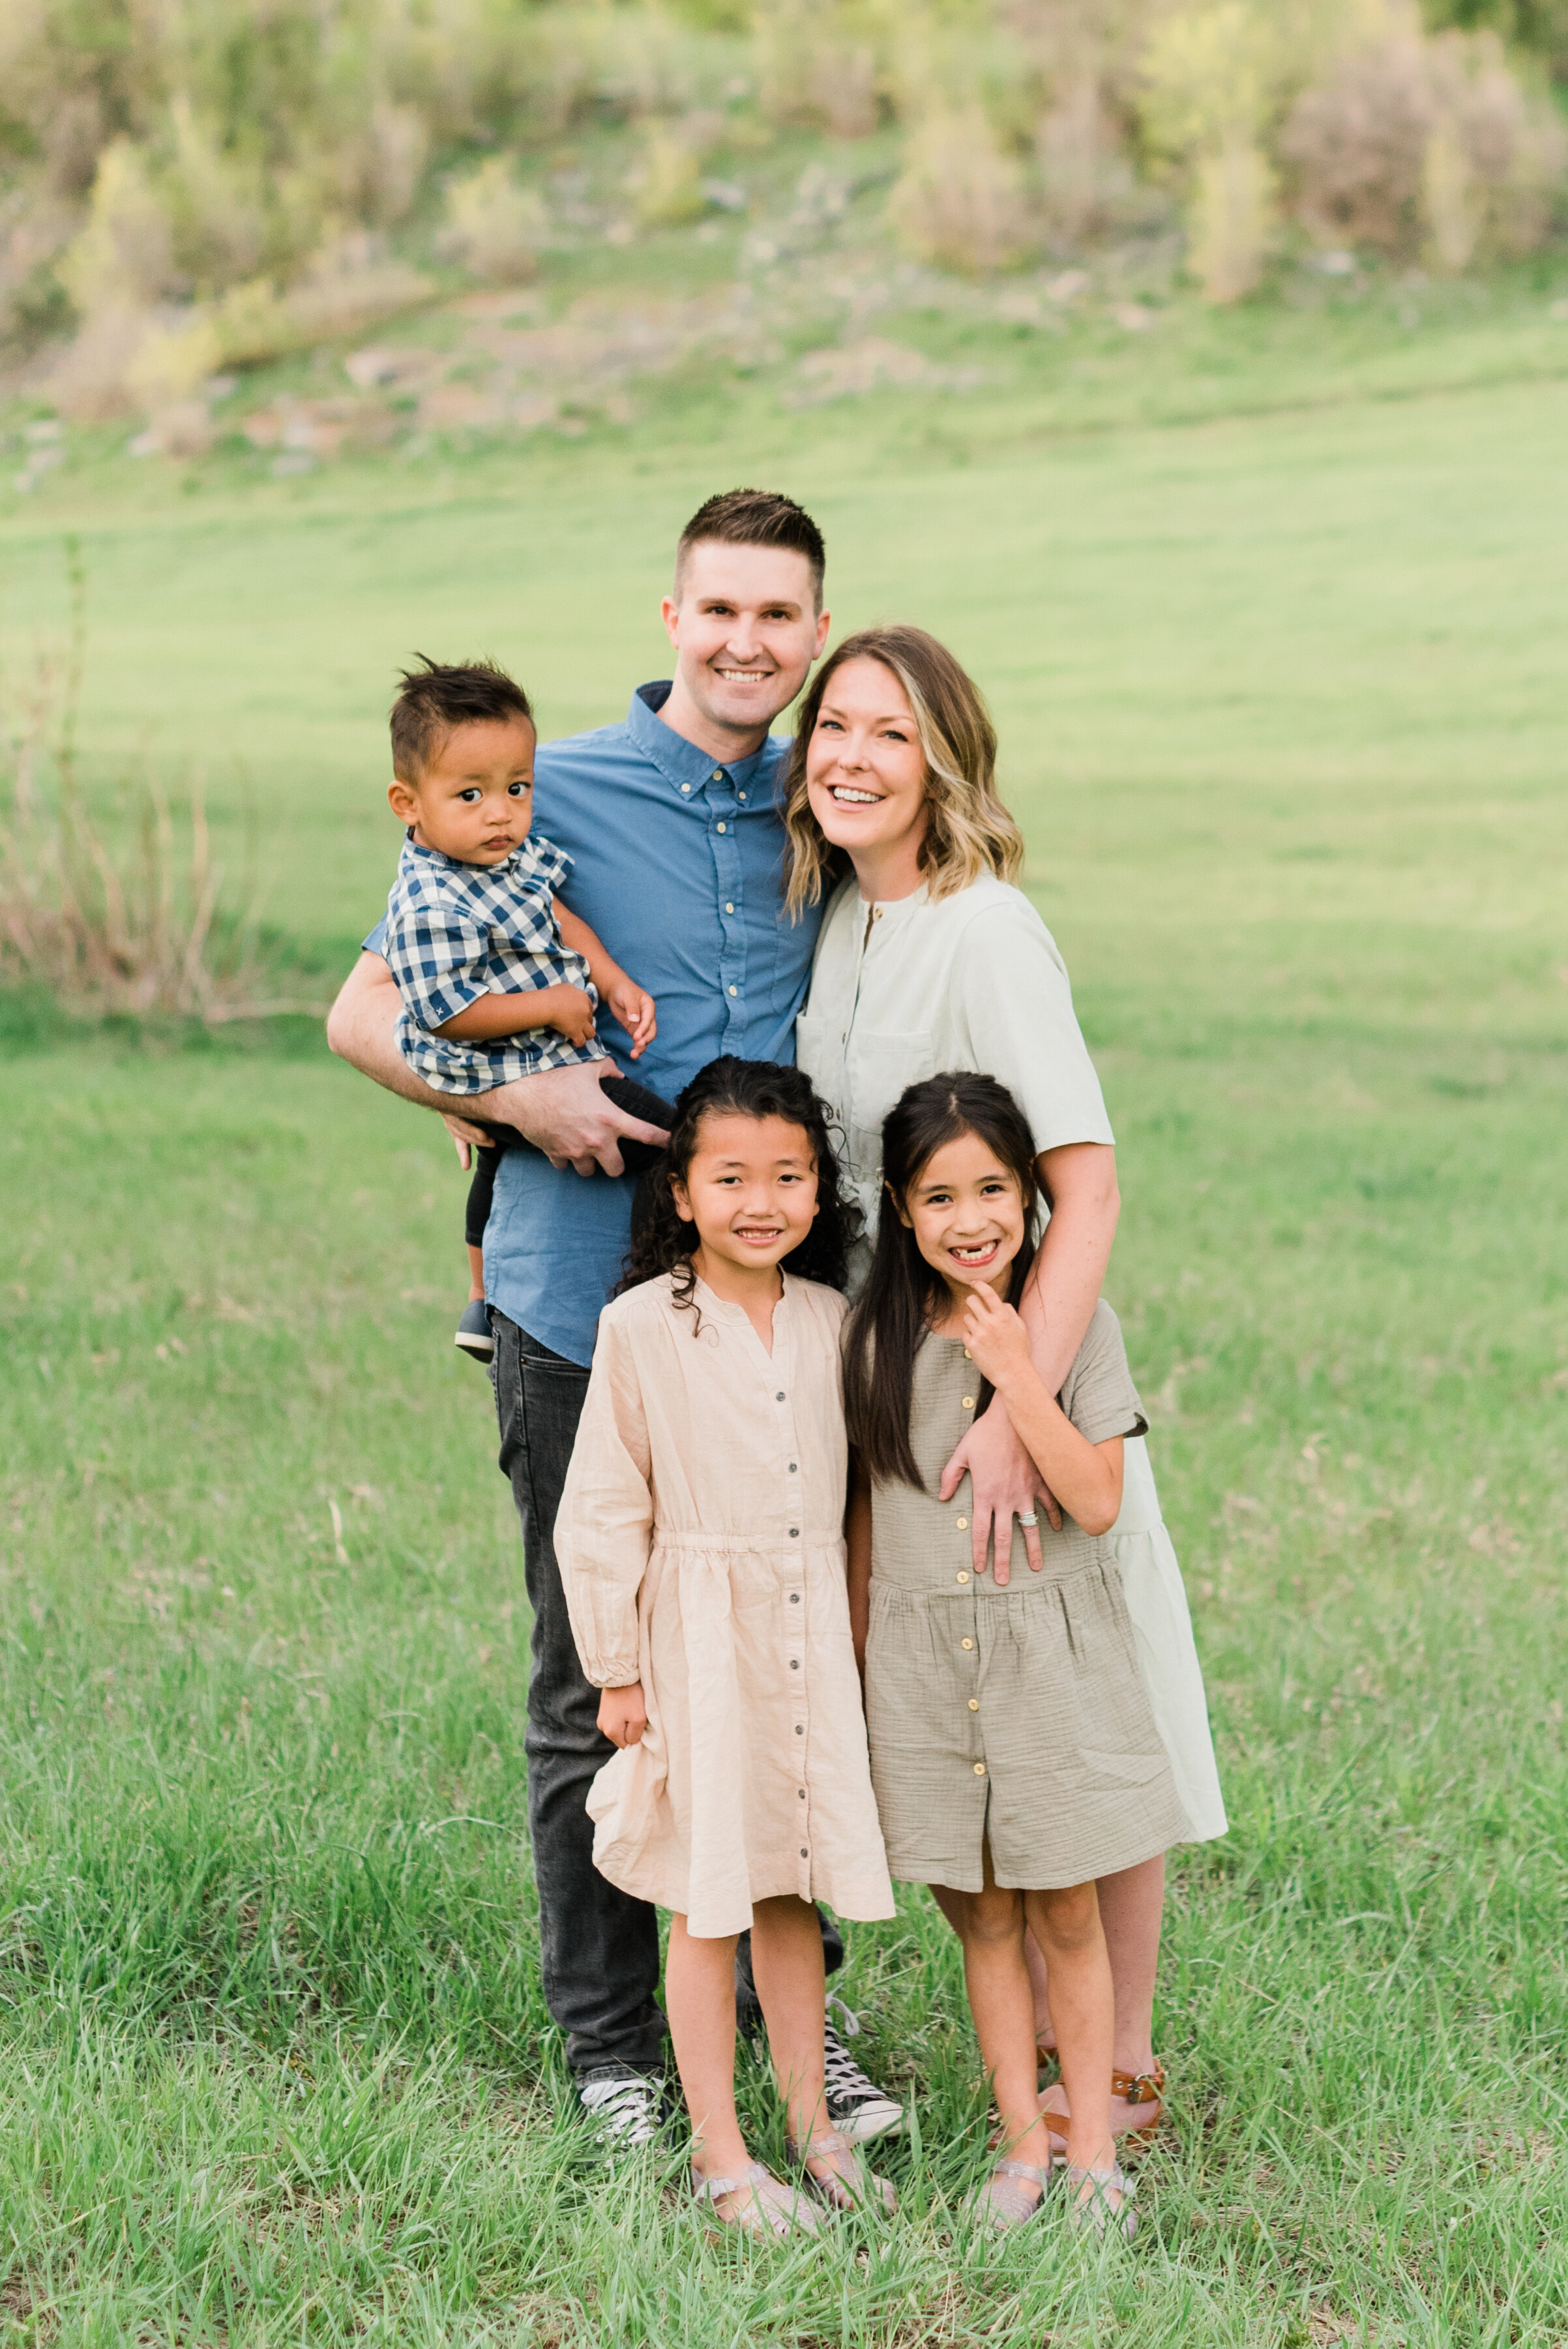  A young family of five cuddles together for a family photo in a grassy open field. family of five daughters and son multinational family  mountainside photos #jacquieericksonphotography #youngfamily #outdoorphotoshoot   